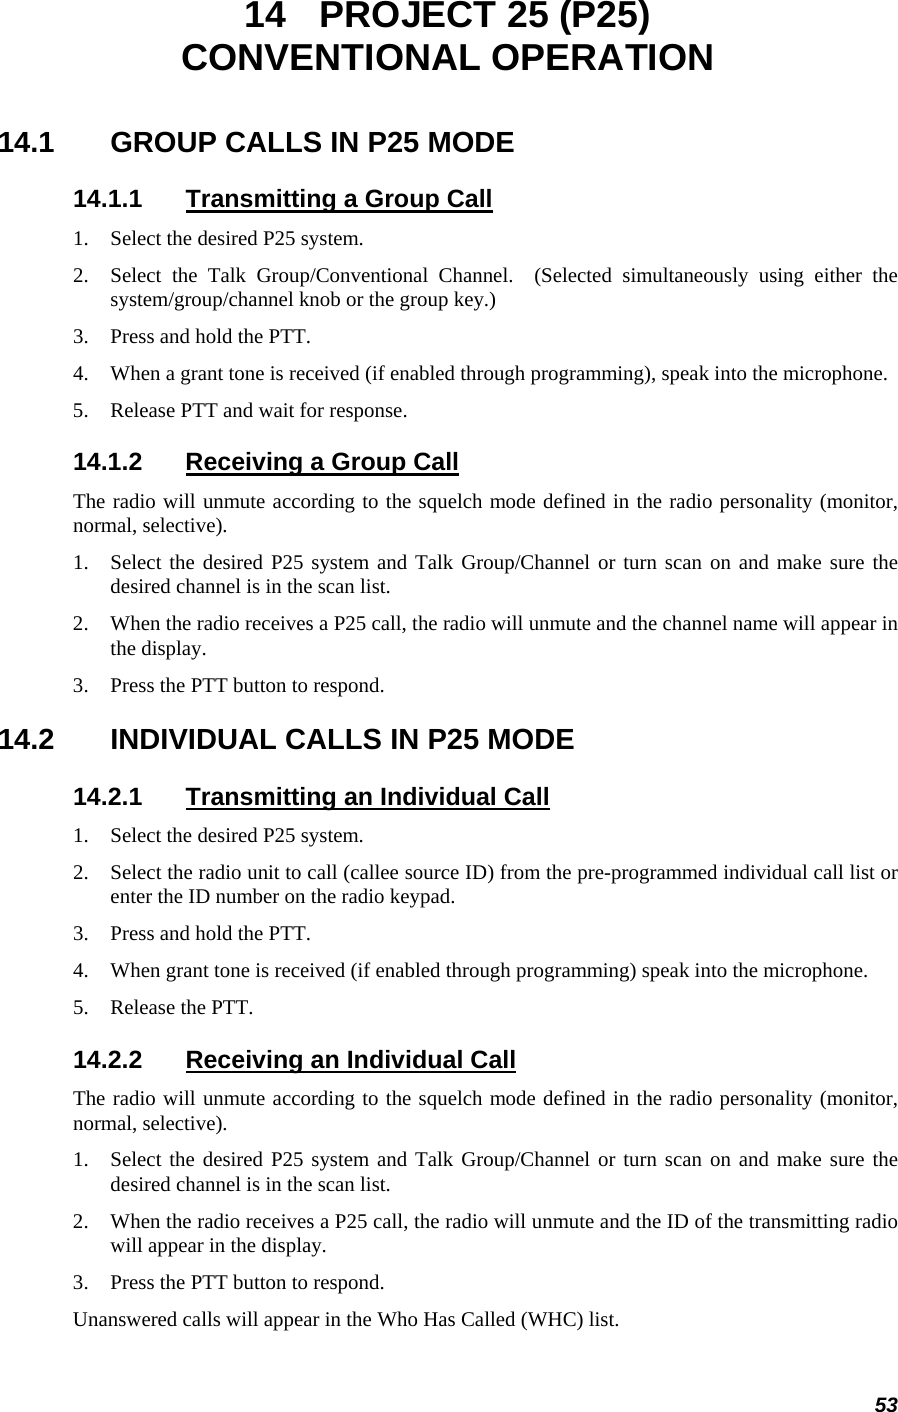 53 14  PROJECT 25 (P25) CONVENTIONAL OPERATION 14.1  GROUP CALLS IN P25 MODE 14.1.1  Transmitting a Group Call 1. Select the desired P25 system.  2. Select the Talk Group/Conventional Channel.  (Selected simultaneously using either the system/group/channel knob or the group key.) 3. Press and hold the PTT. 4. When a grant tone is received (if enabled through programming), speak into the microphone. 5. Release PTT and wait for response. 14.1.2  Receiving a Group Call The radio will unmute according to the squelch mode defined in the radio personality (monitor, normal, selective). 1. Select the desired P25 system and Talk Group/Channel or turn scan on and make sure the desired channel is in the scan list. 2. When the radio receives a P25 call, the radio will unmute and the channel name will appear in the display. 3. Press the PTT button to respond. 14.2  INDIVIDUAL CALLS IN P25 MODE 14.2.1  Transmitting an Individual Call 1. Select the desired P25 system.  2. Select the radio unit to call (callee source ID) from the pre-programmed individual call list or enter the ID number on the radio keypad. 3. Press and hold the PTT. 4. When grant tone is received (if enabled through programming) speak into the microphone. 5. Release the PTT. 14.2.2  Receiving an Individual Call The radio will unmute according to the squelch mode defined in the radio personality (monitor, normal, selective). 1. Select the desired P25 system and Talk Group/Channel or turn scan on and make sure the desired channel is in the scan list. 2. When the radio receives a P25 call, the radio will unmute and the ID of the transmitting radio will appear in the display. 3. Press the PTT button to respond. Unanswered calls will appear in the Who Has Called (WHC) list. 